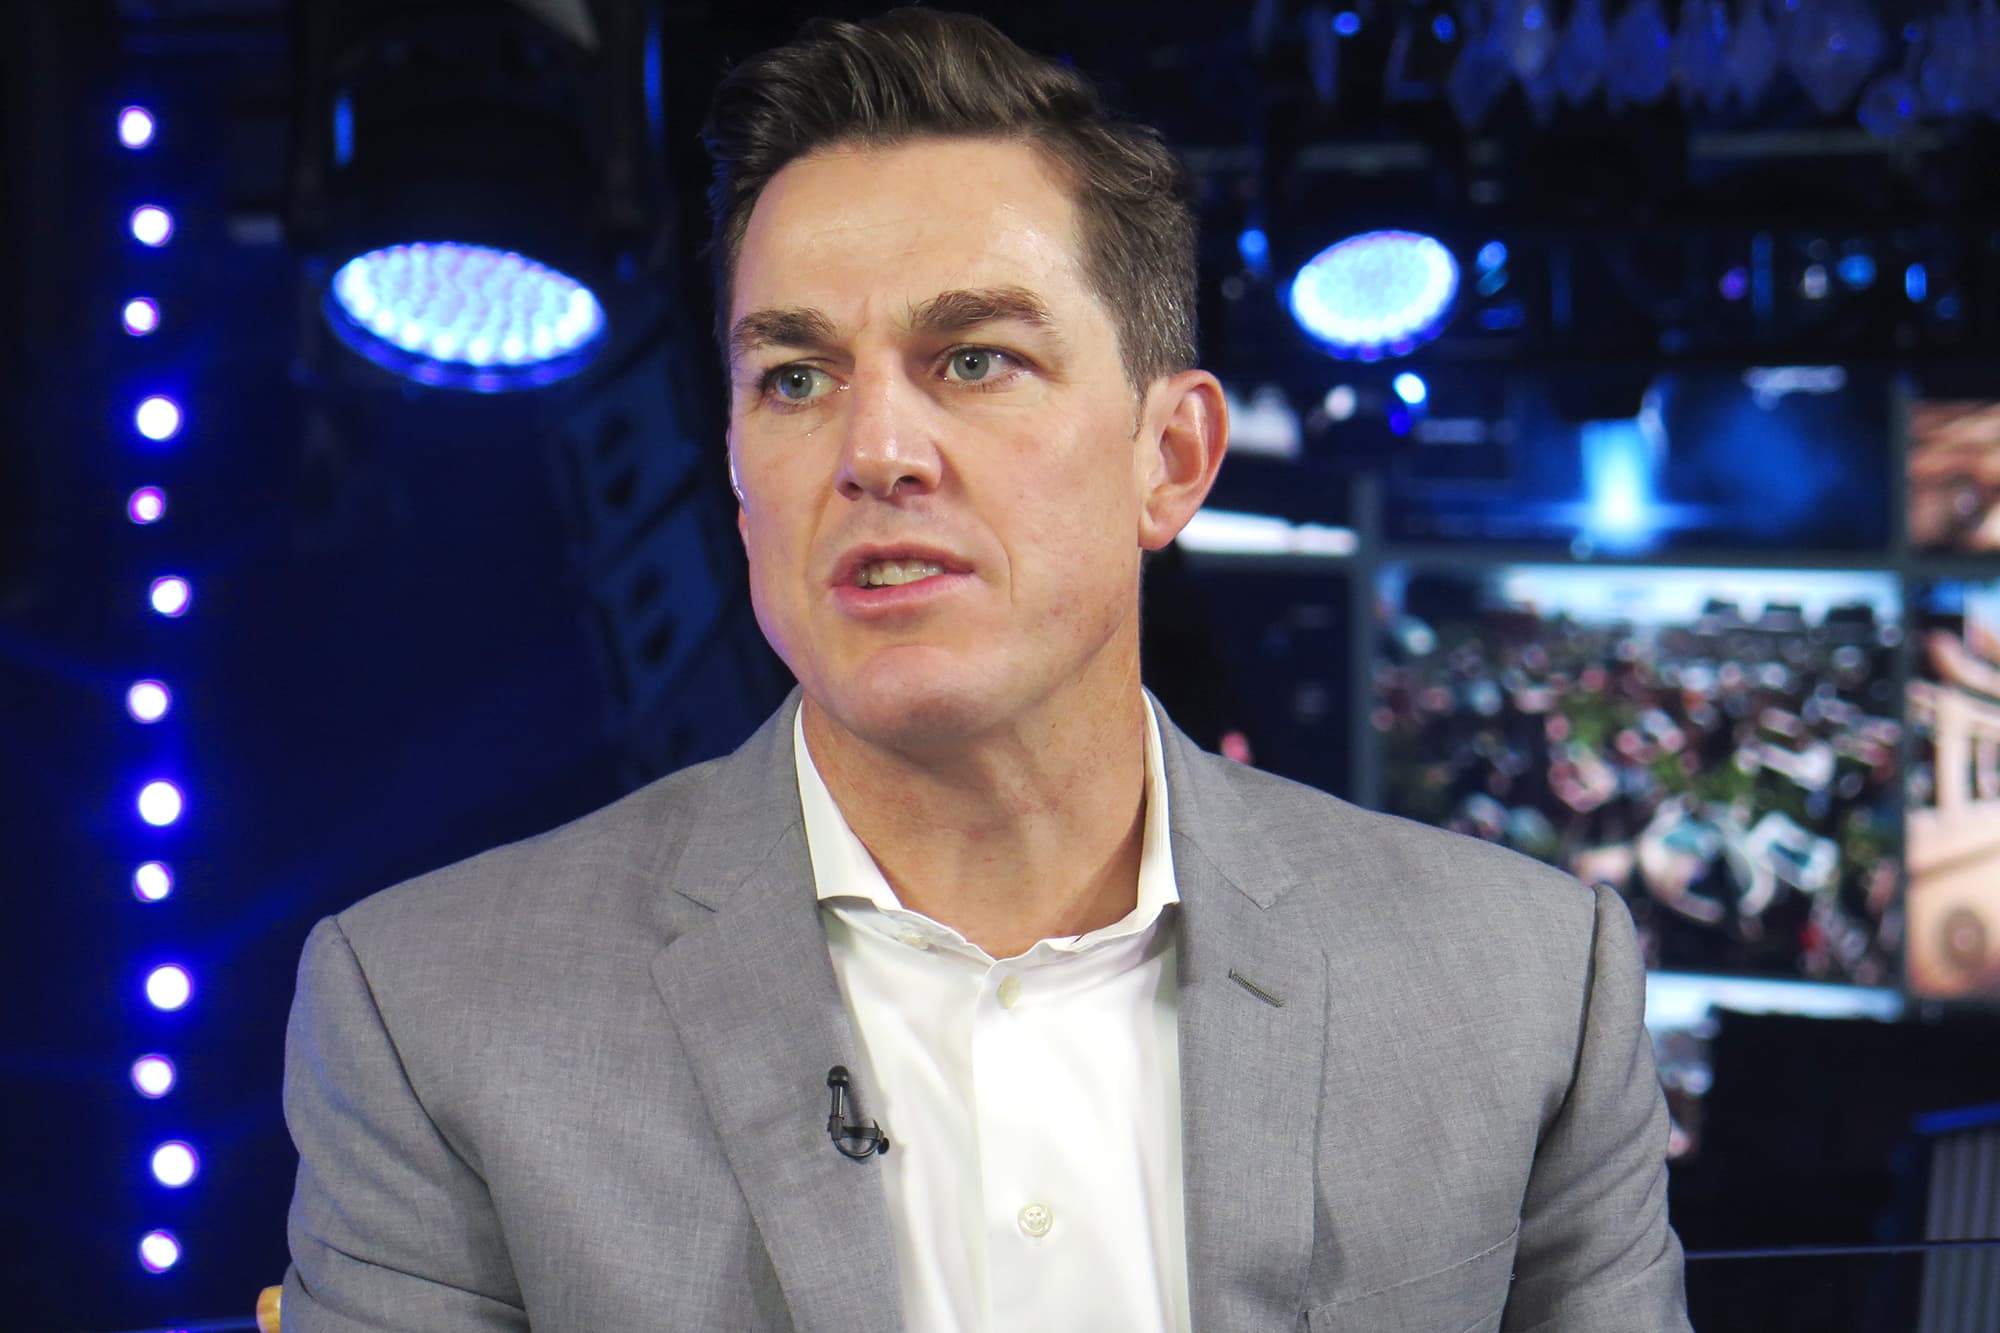 EA CEO Andrew Wilson on demand for its latest games during the pandemic